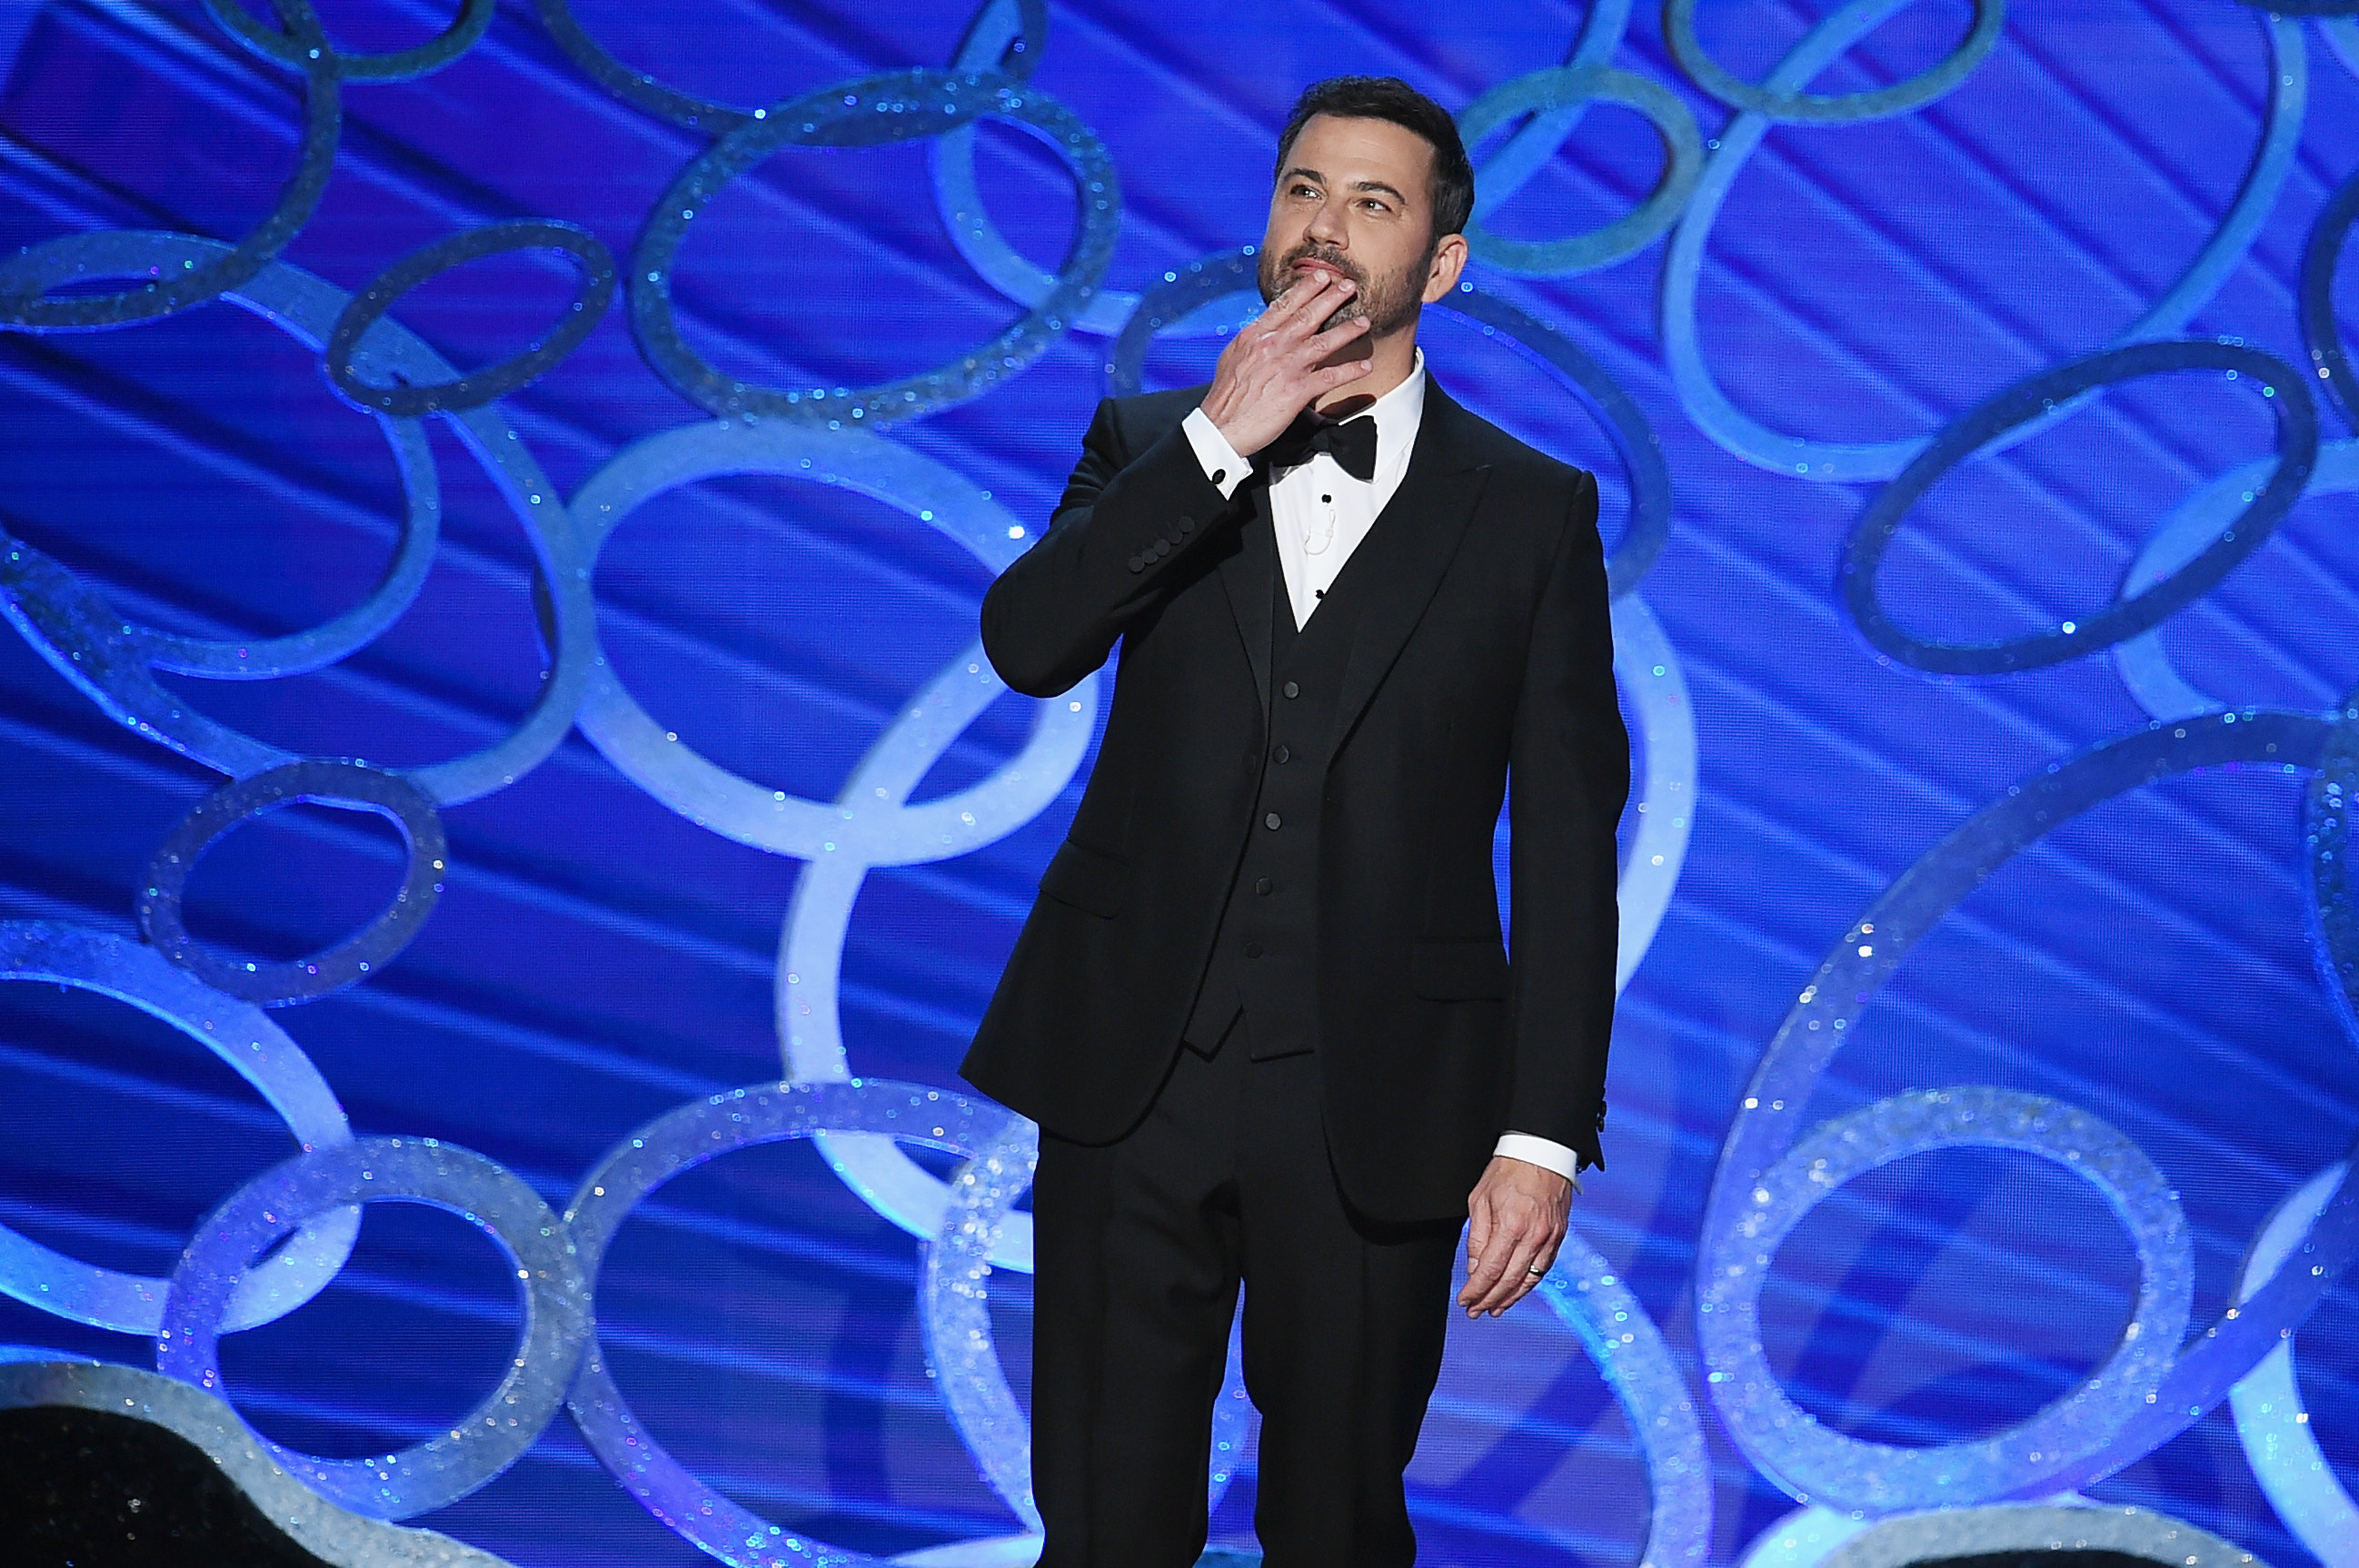 FILE PHOTO: LOS ANGELES, CA - SEPTEMBER 18: Host Jimmy Kimmel speaks onstage during the 68th Annual Primetime Emmy Awards at Microsoft Theater on September 18, 2016 in Los Angeles, California.   Kevin Winter/Getty Images/AFP